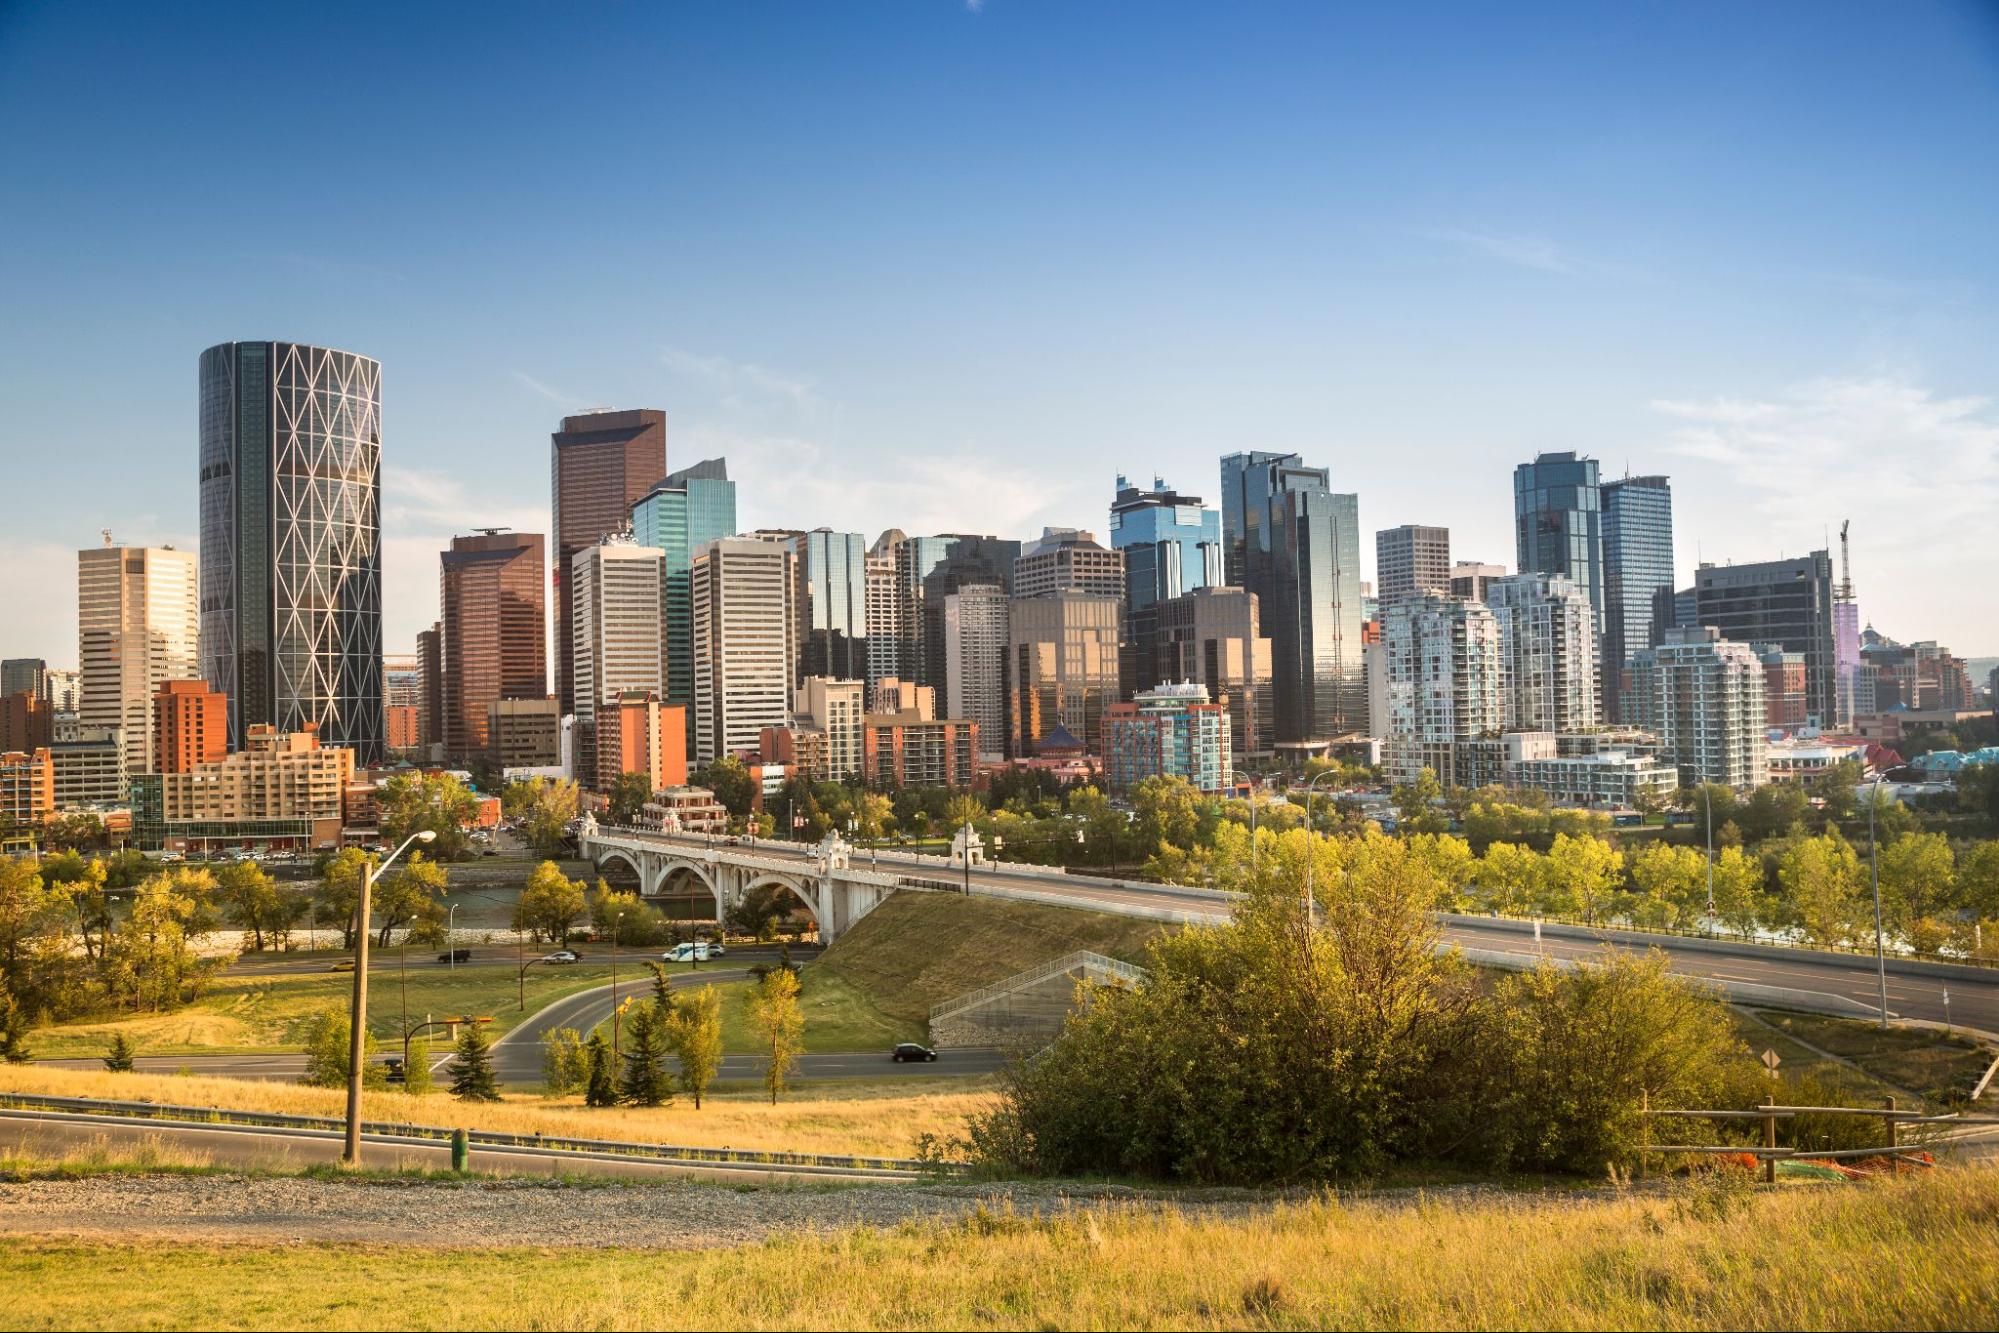 A view of the city of calgary from a grassy field.